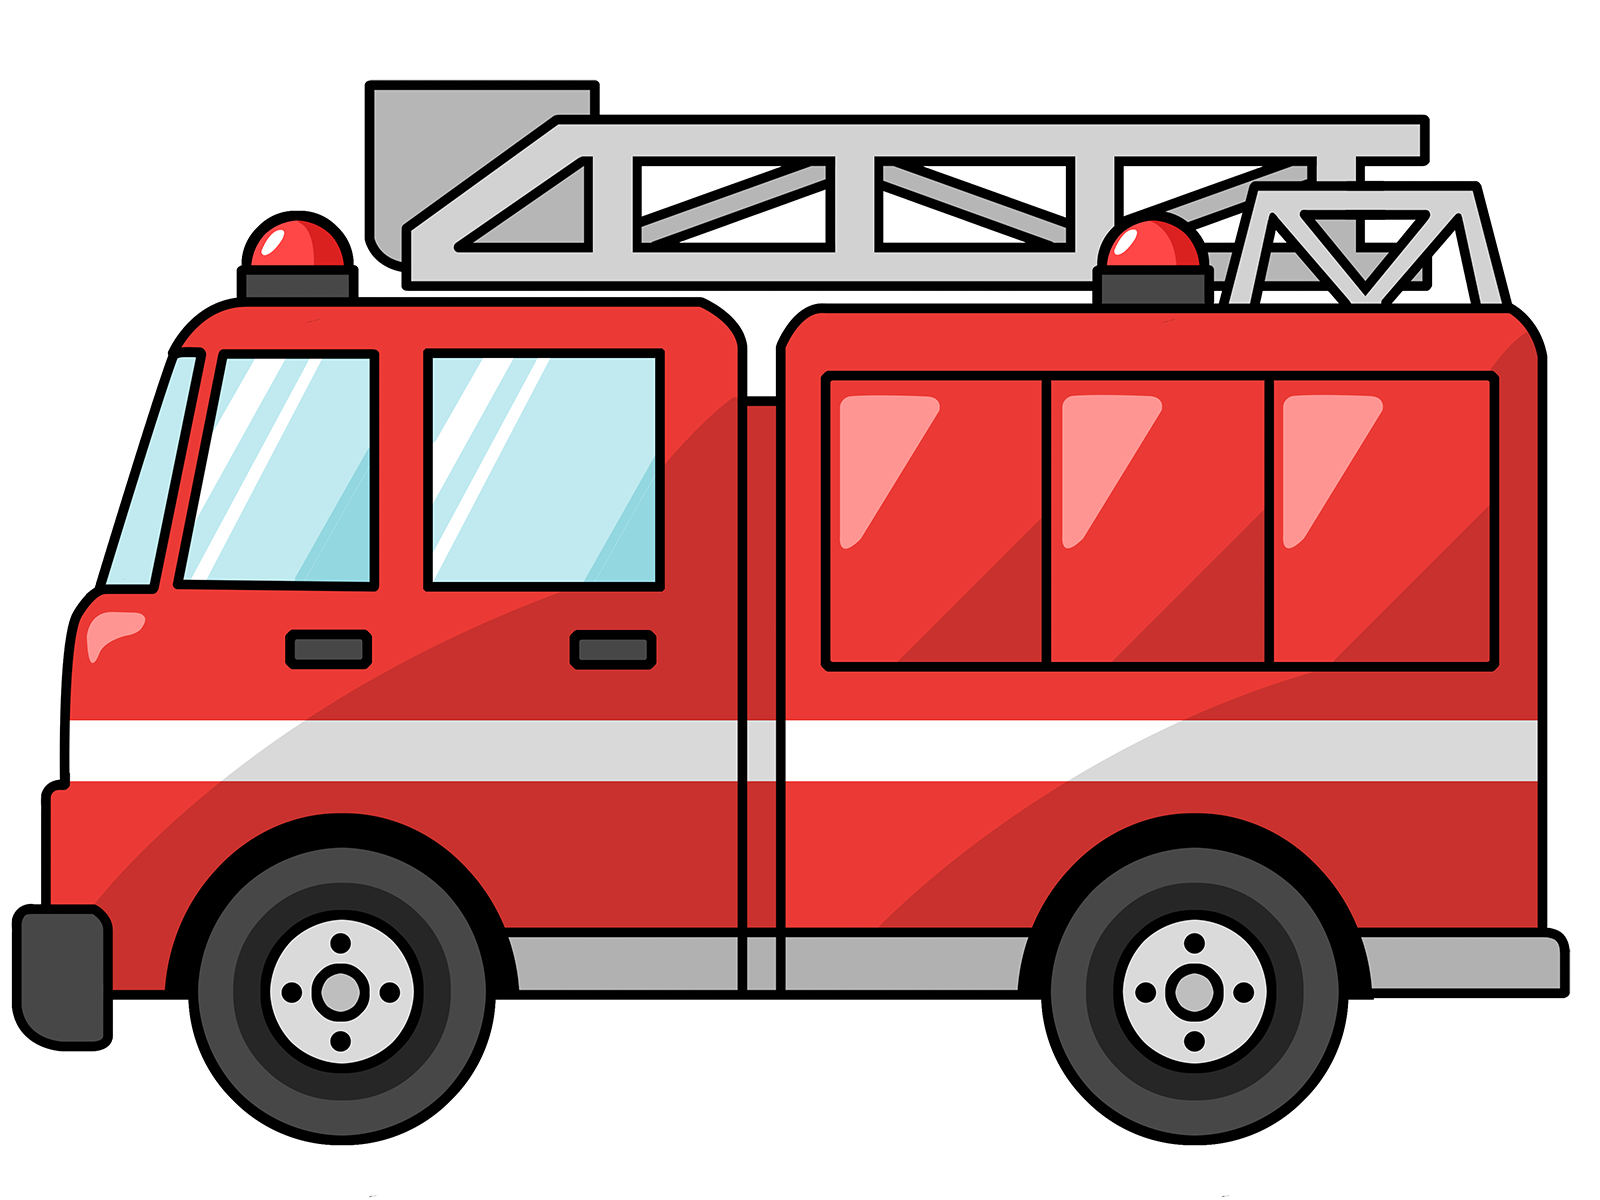 Fire truck free to use cliparts